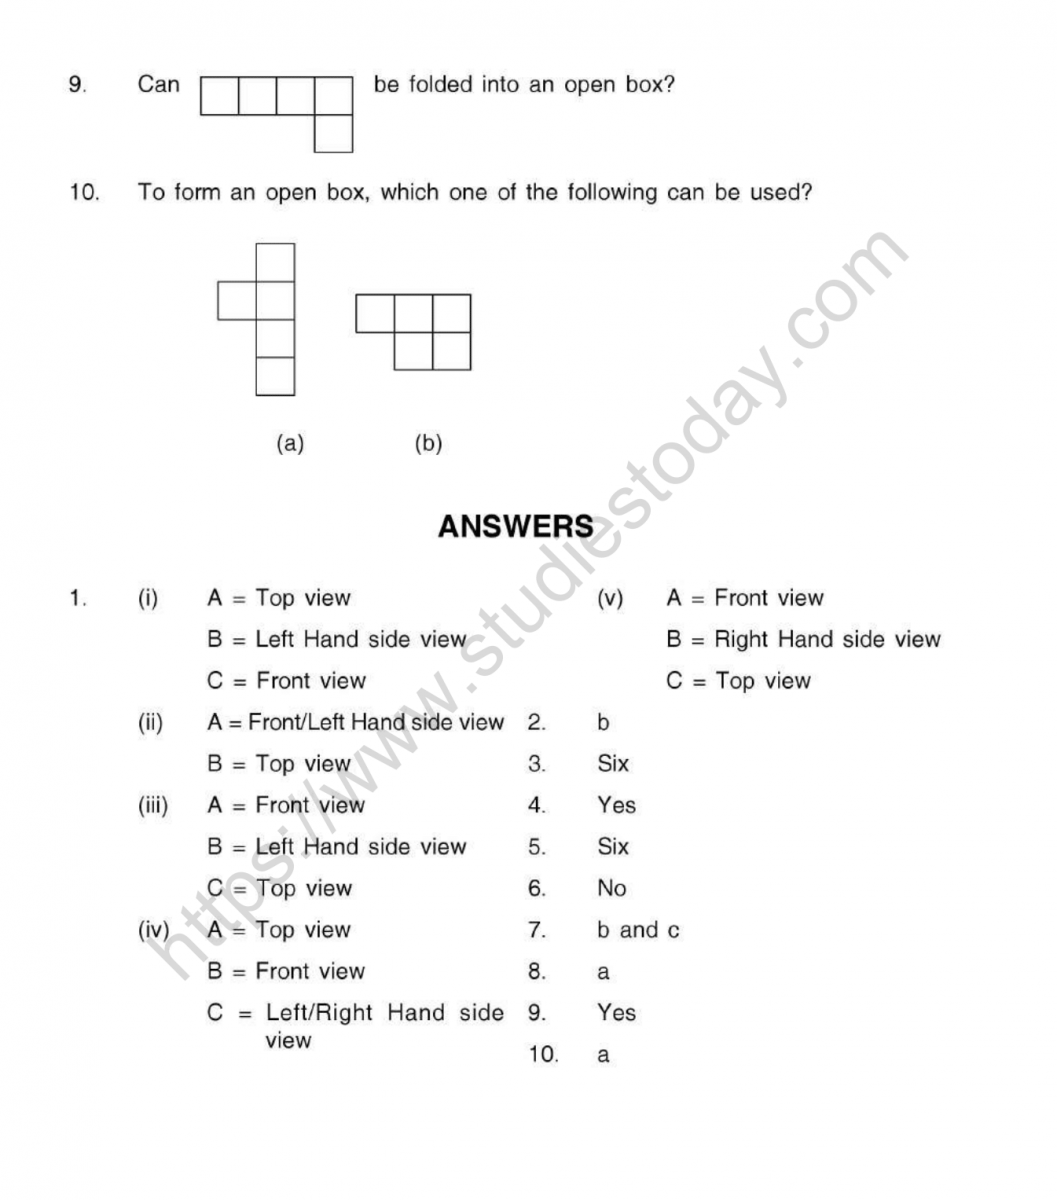 cbse-class-5-mental-maths-boxes-and-sketches-worksheet